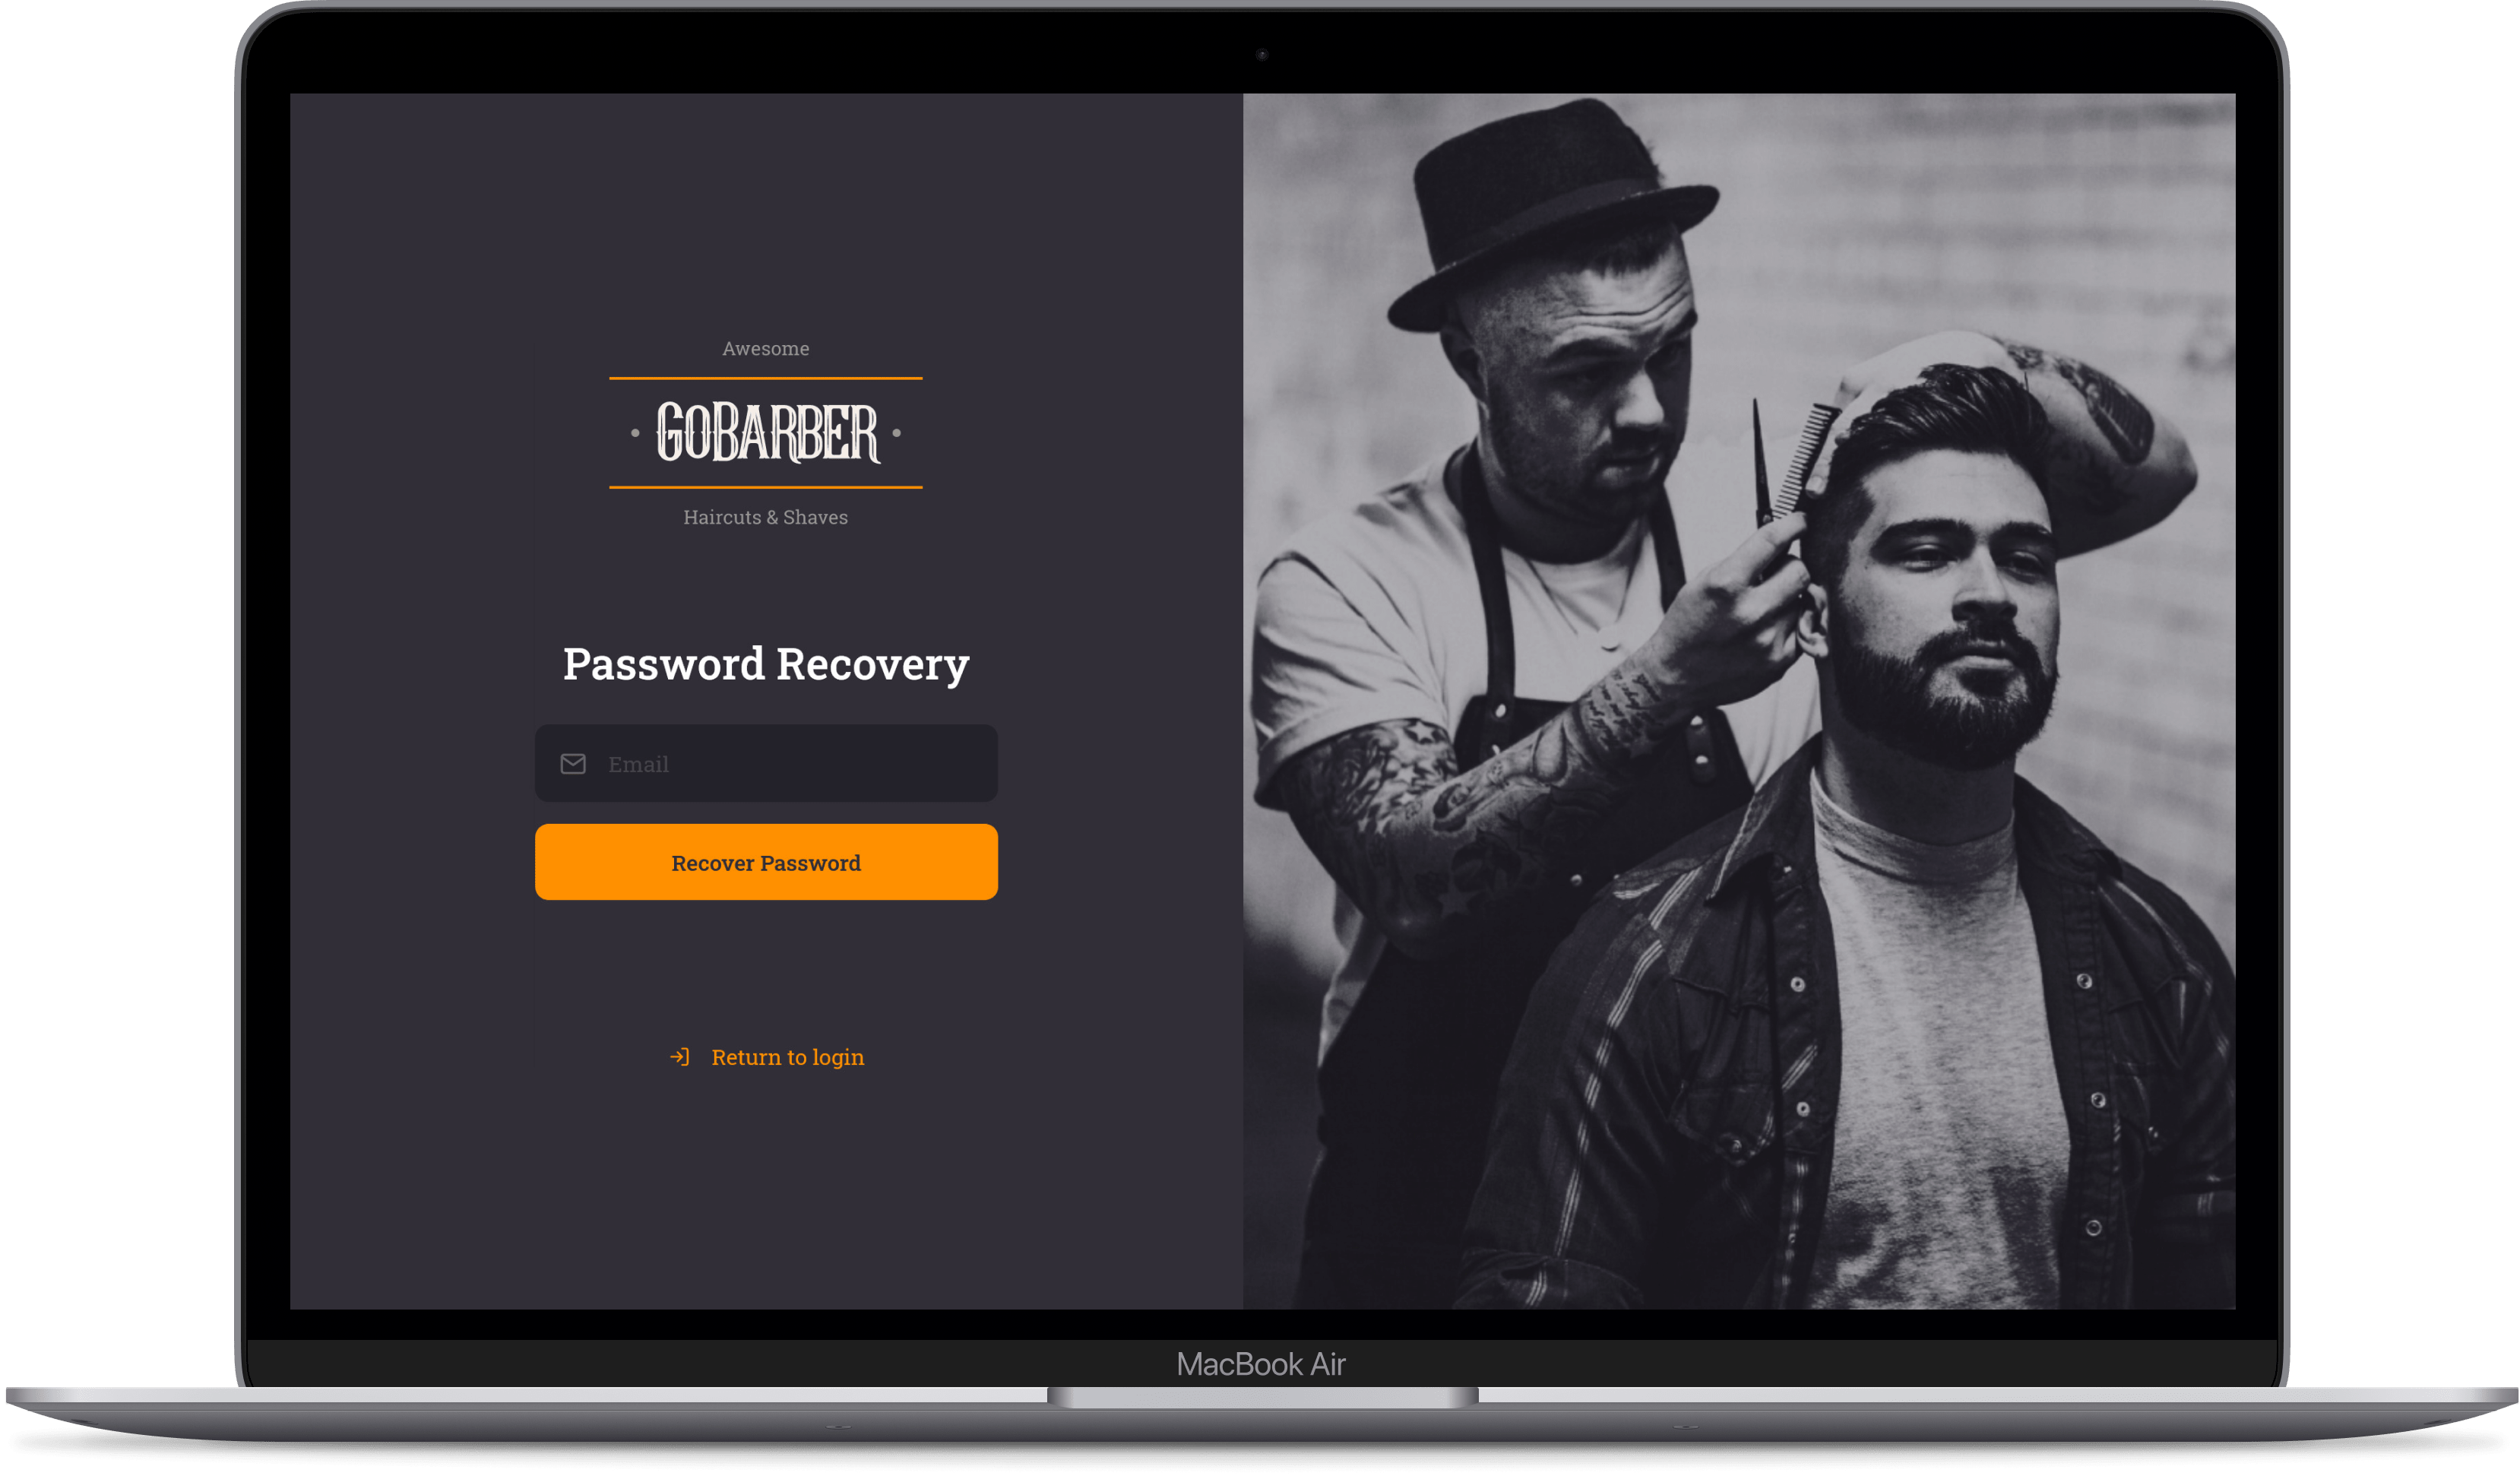 Password Recovery Page